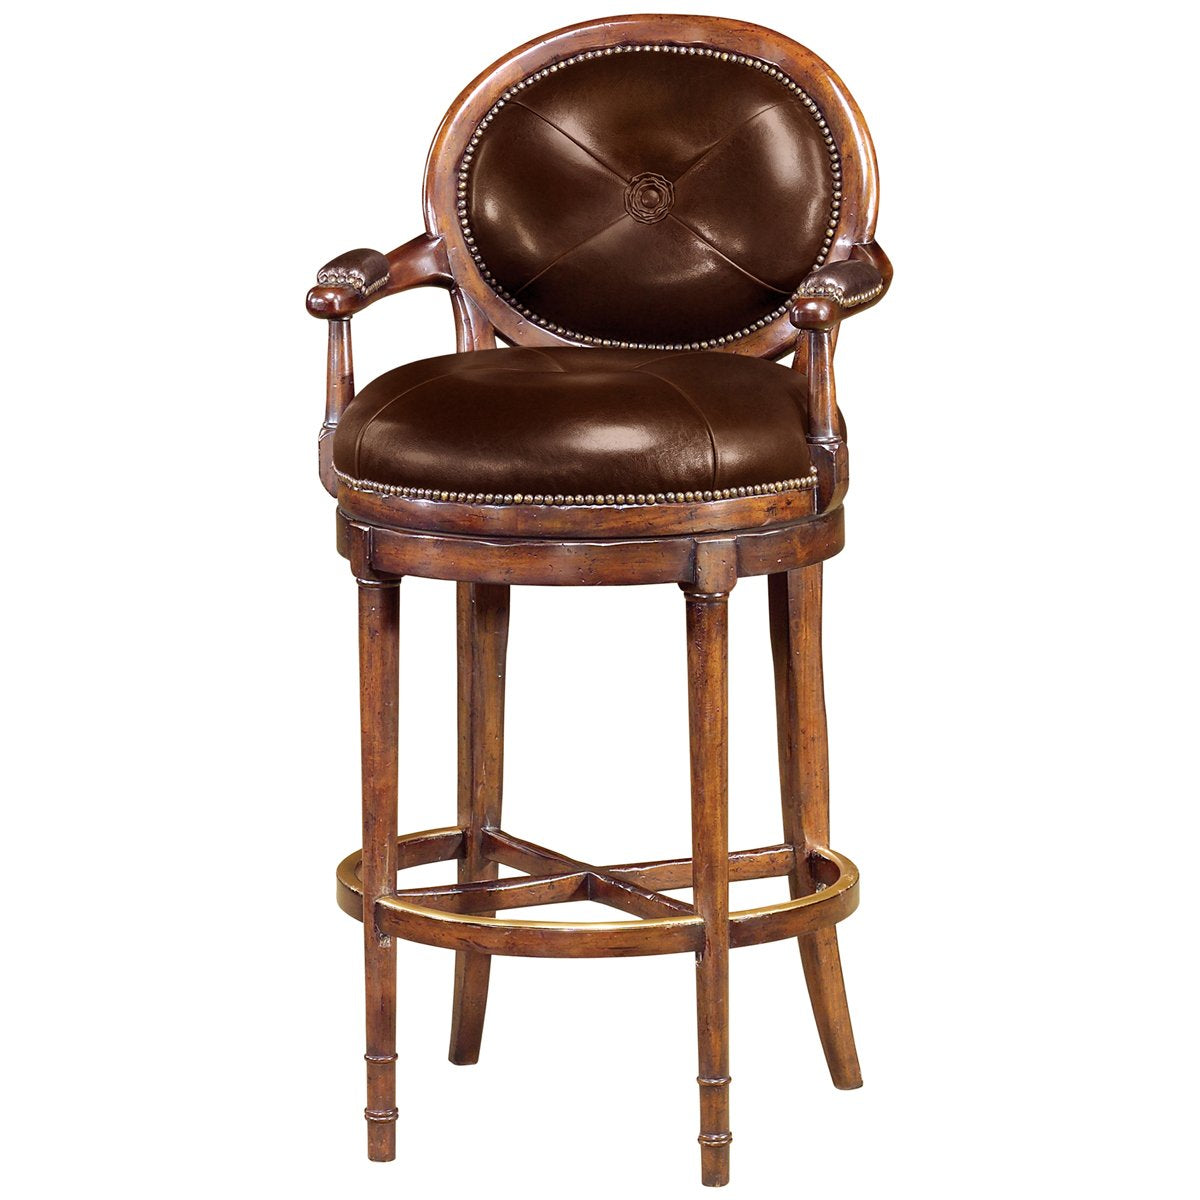 Theodore Alexander Classic Yet Casual At The Barolo Bar Stool